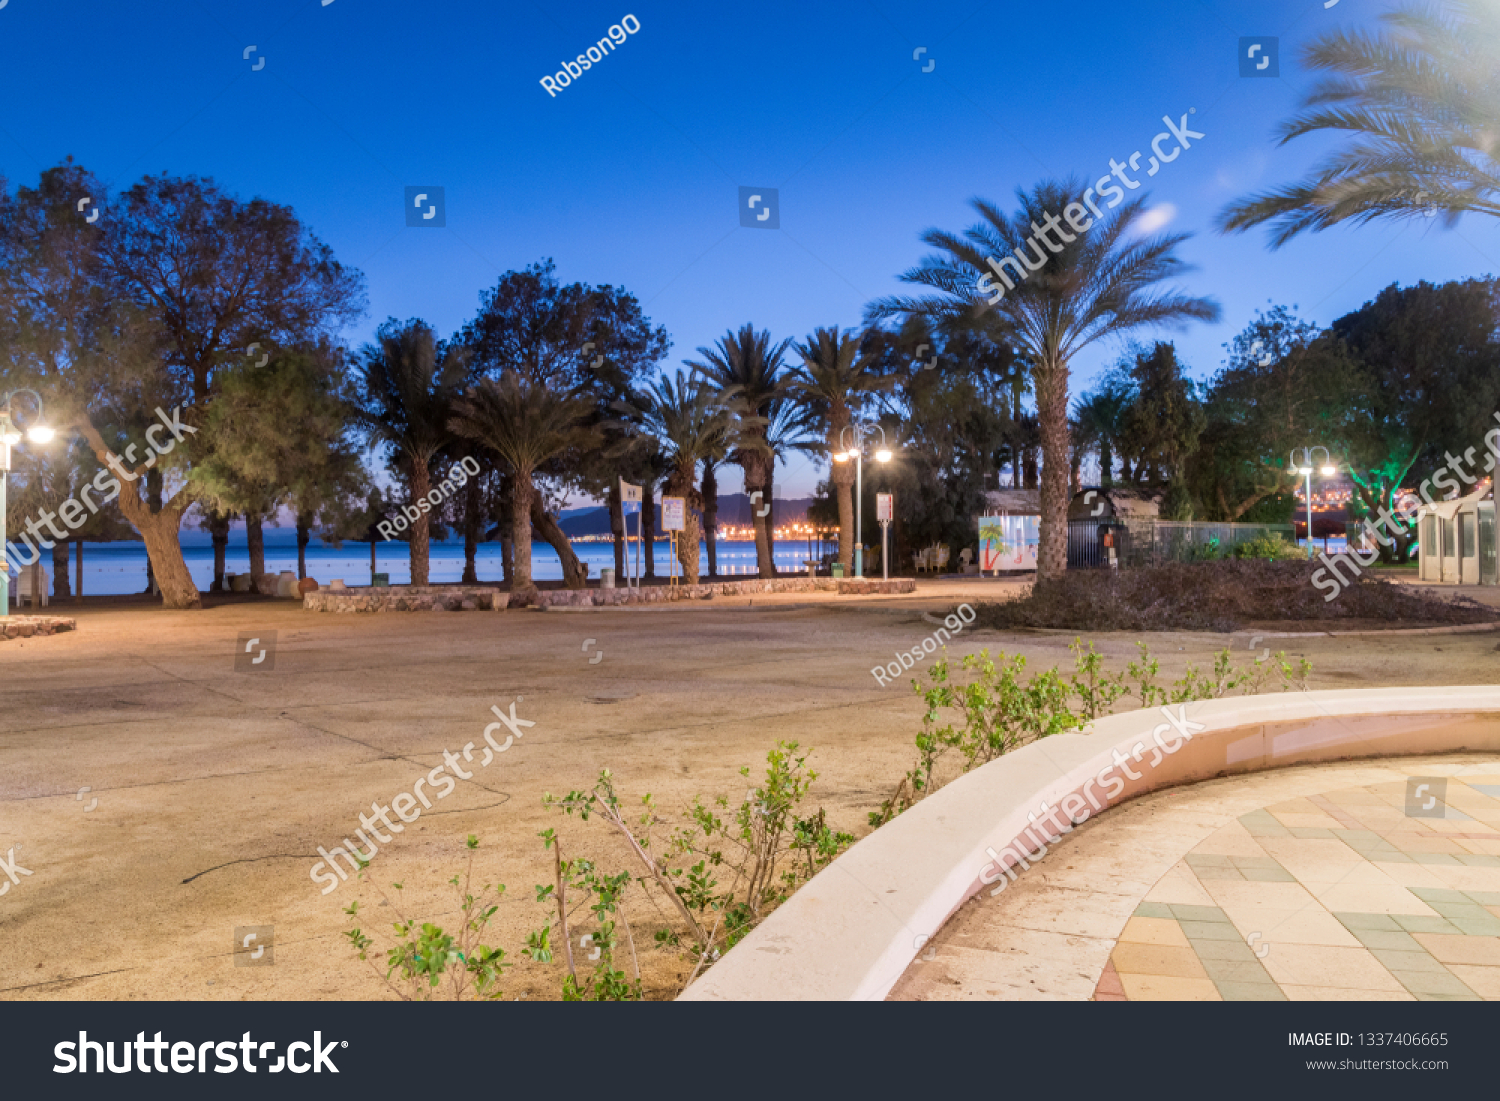 Eilat, Israel - February 9, 2019: View of central promenade in the evening. #1337406665